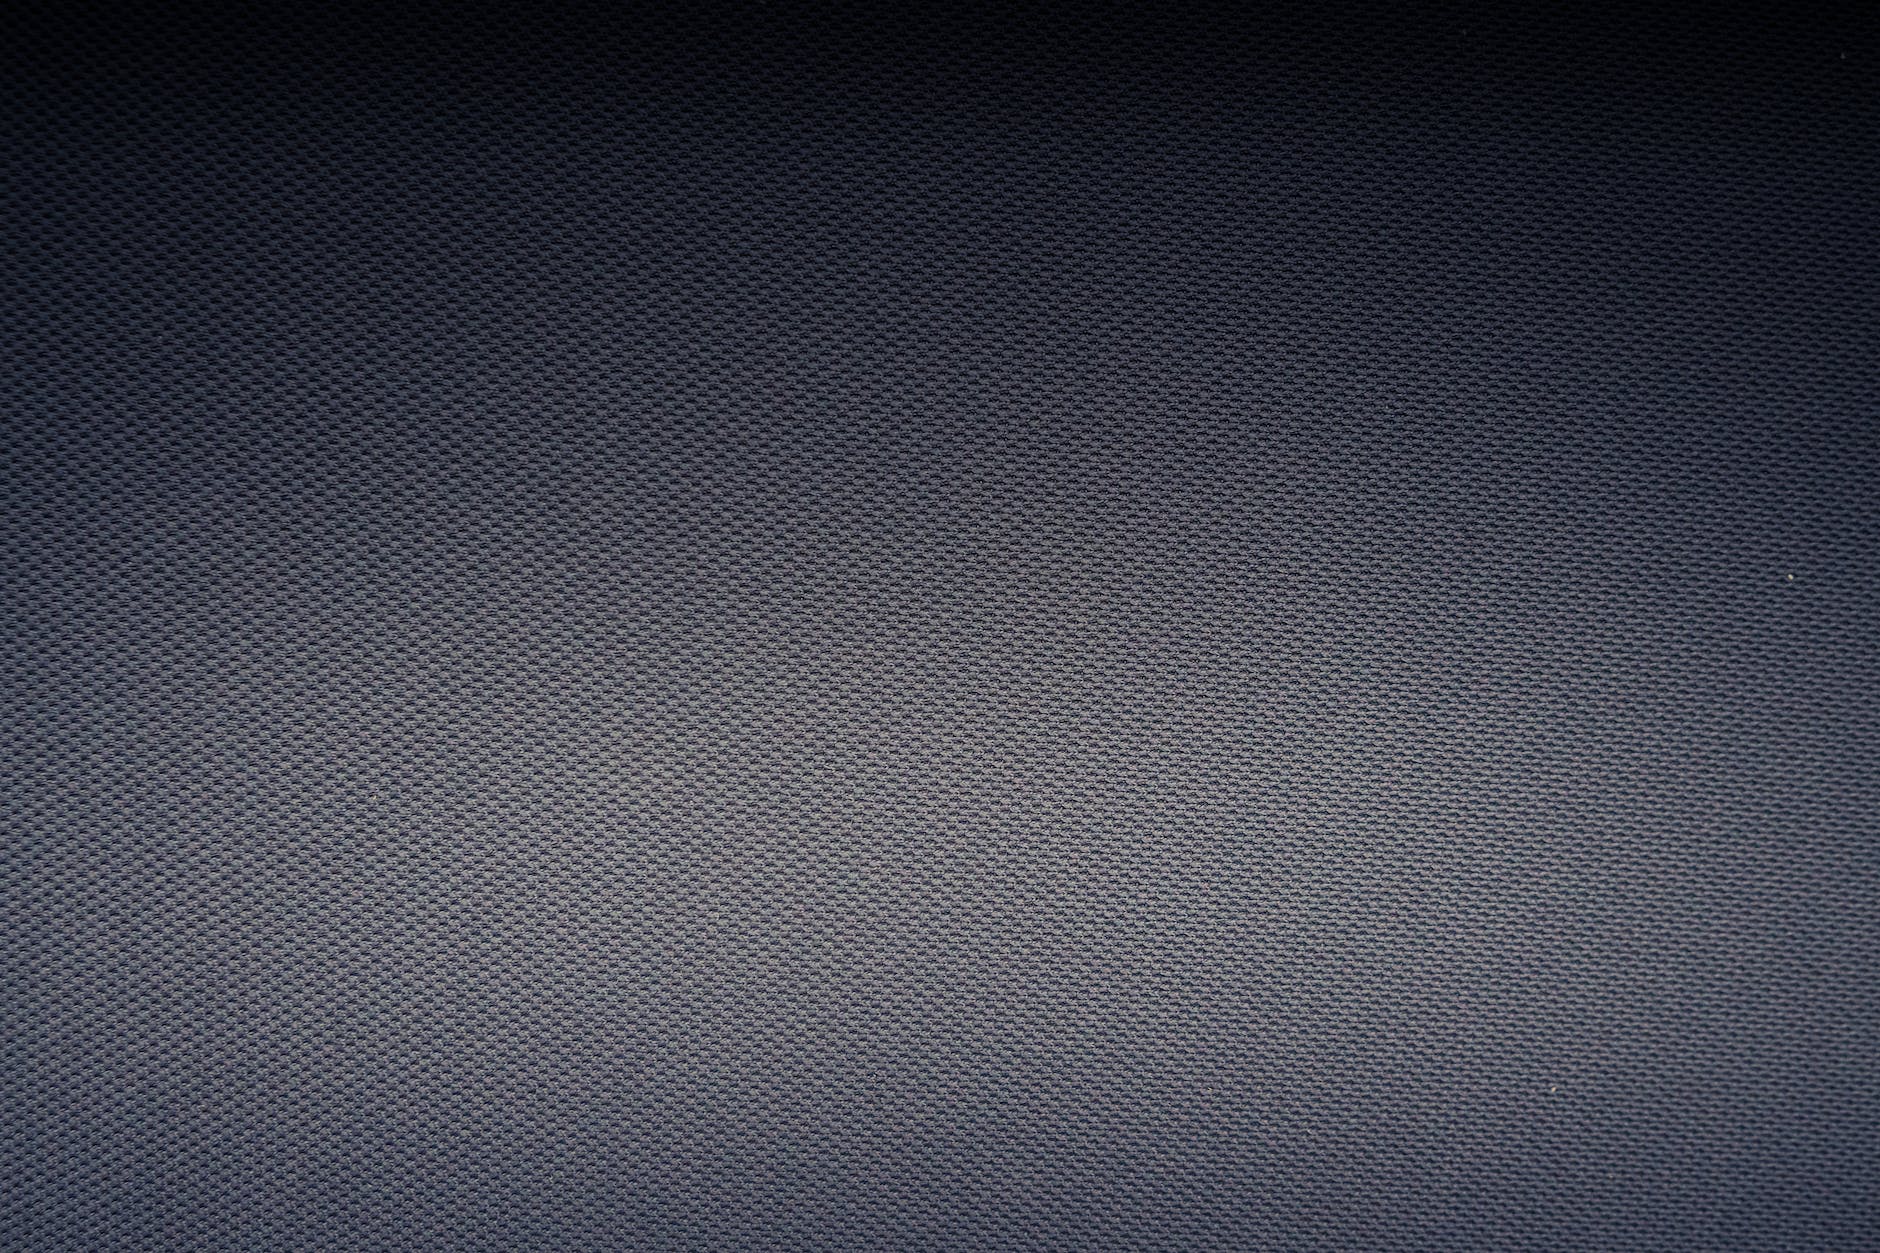 textured background of carbon fiber fabric with tiny holes